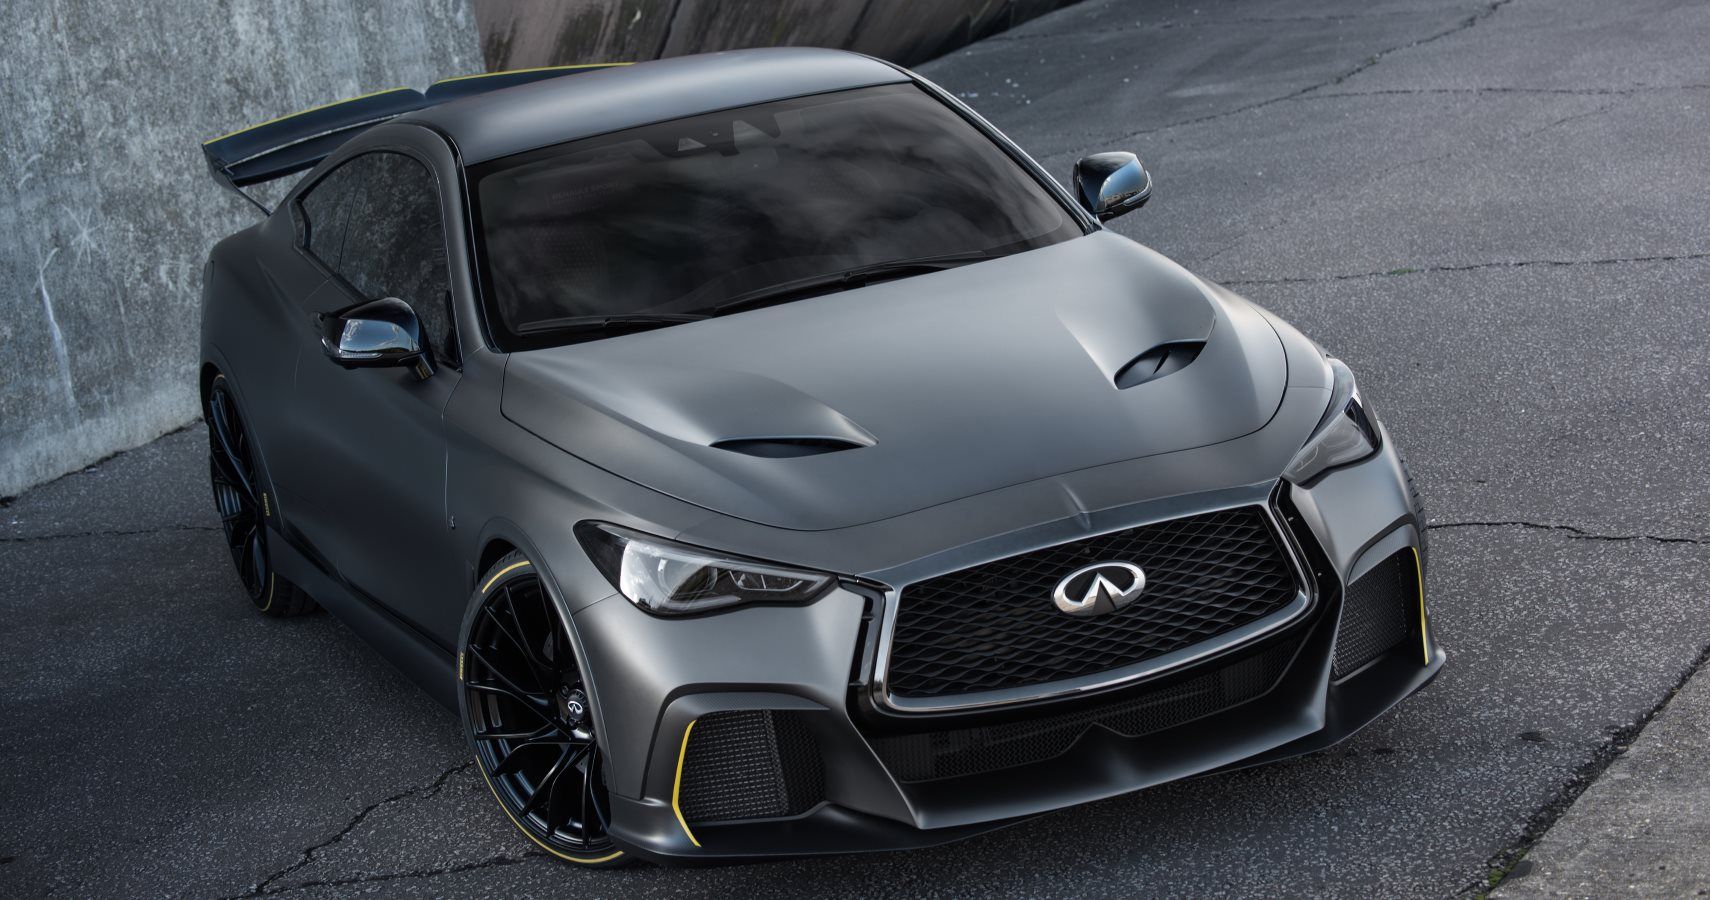 Infiniti Reveals Project Black S Prototype With F1 Components